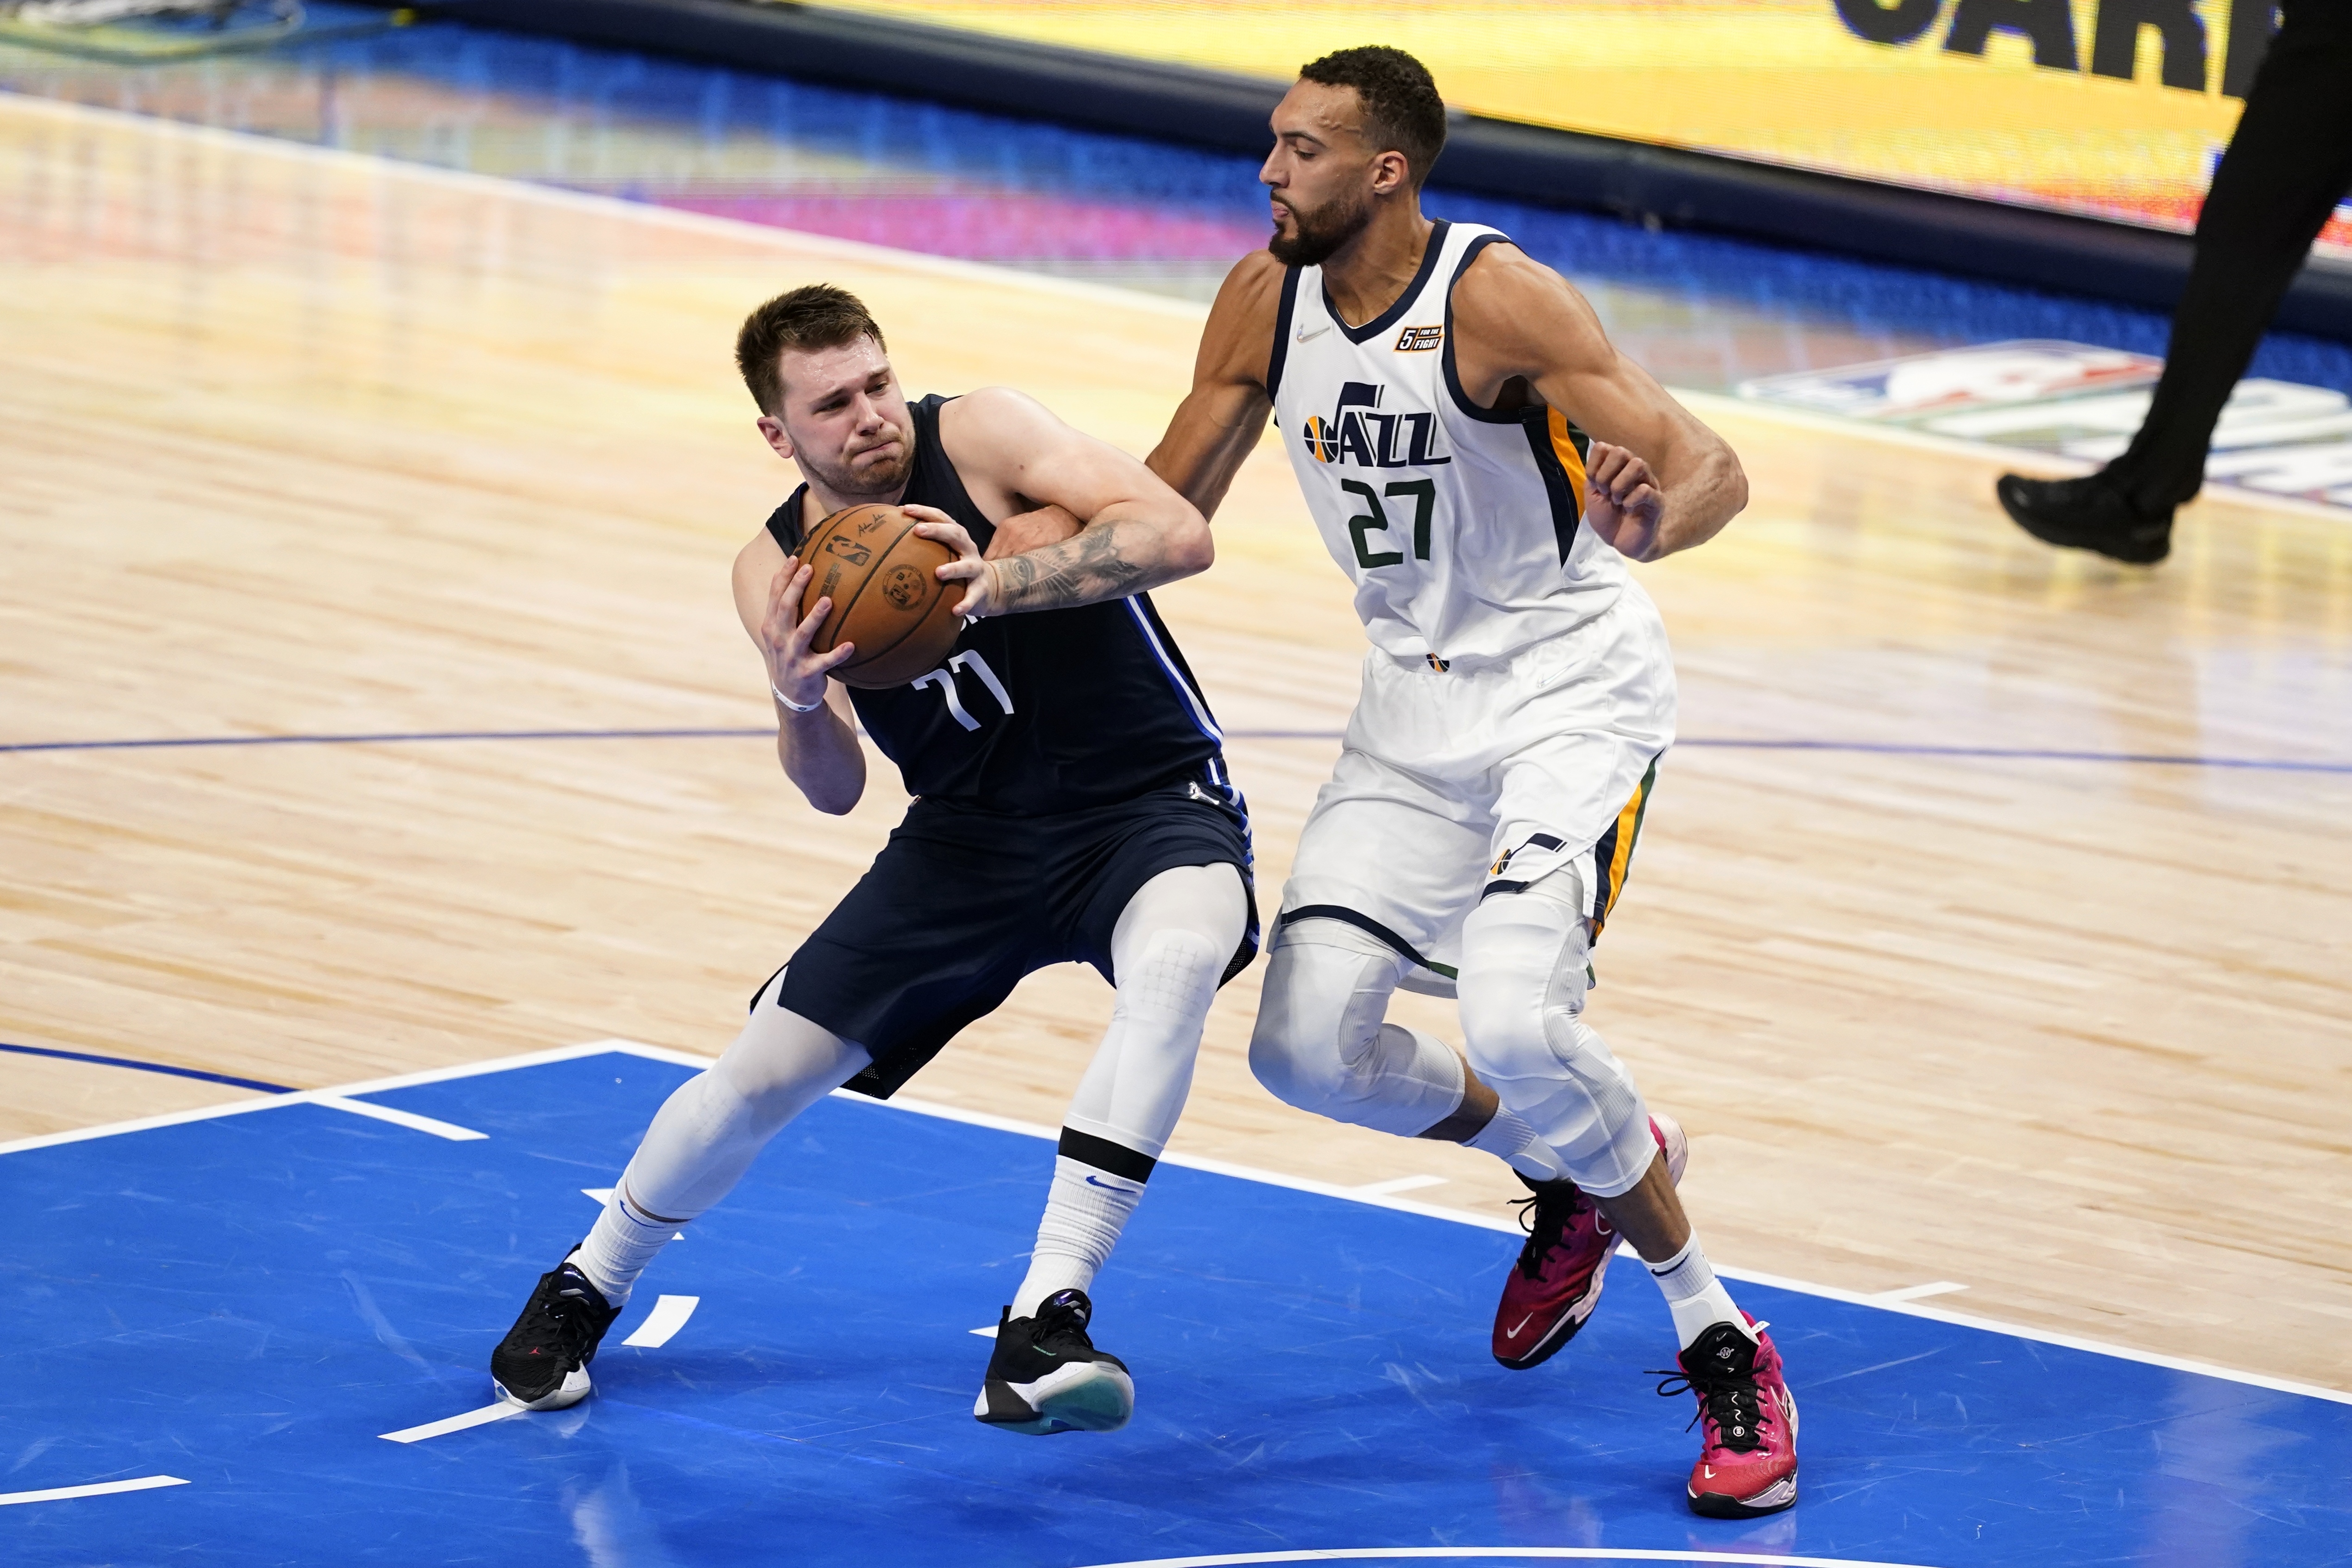 Vivint Arena to return to full capacity for upcoming Jazz playoff games